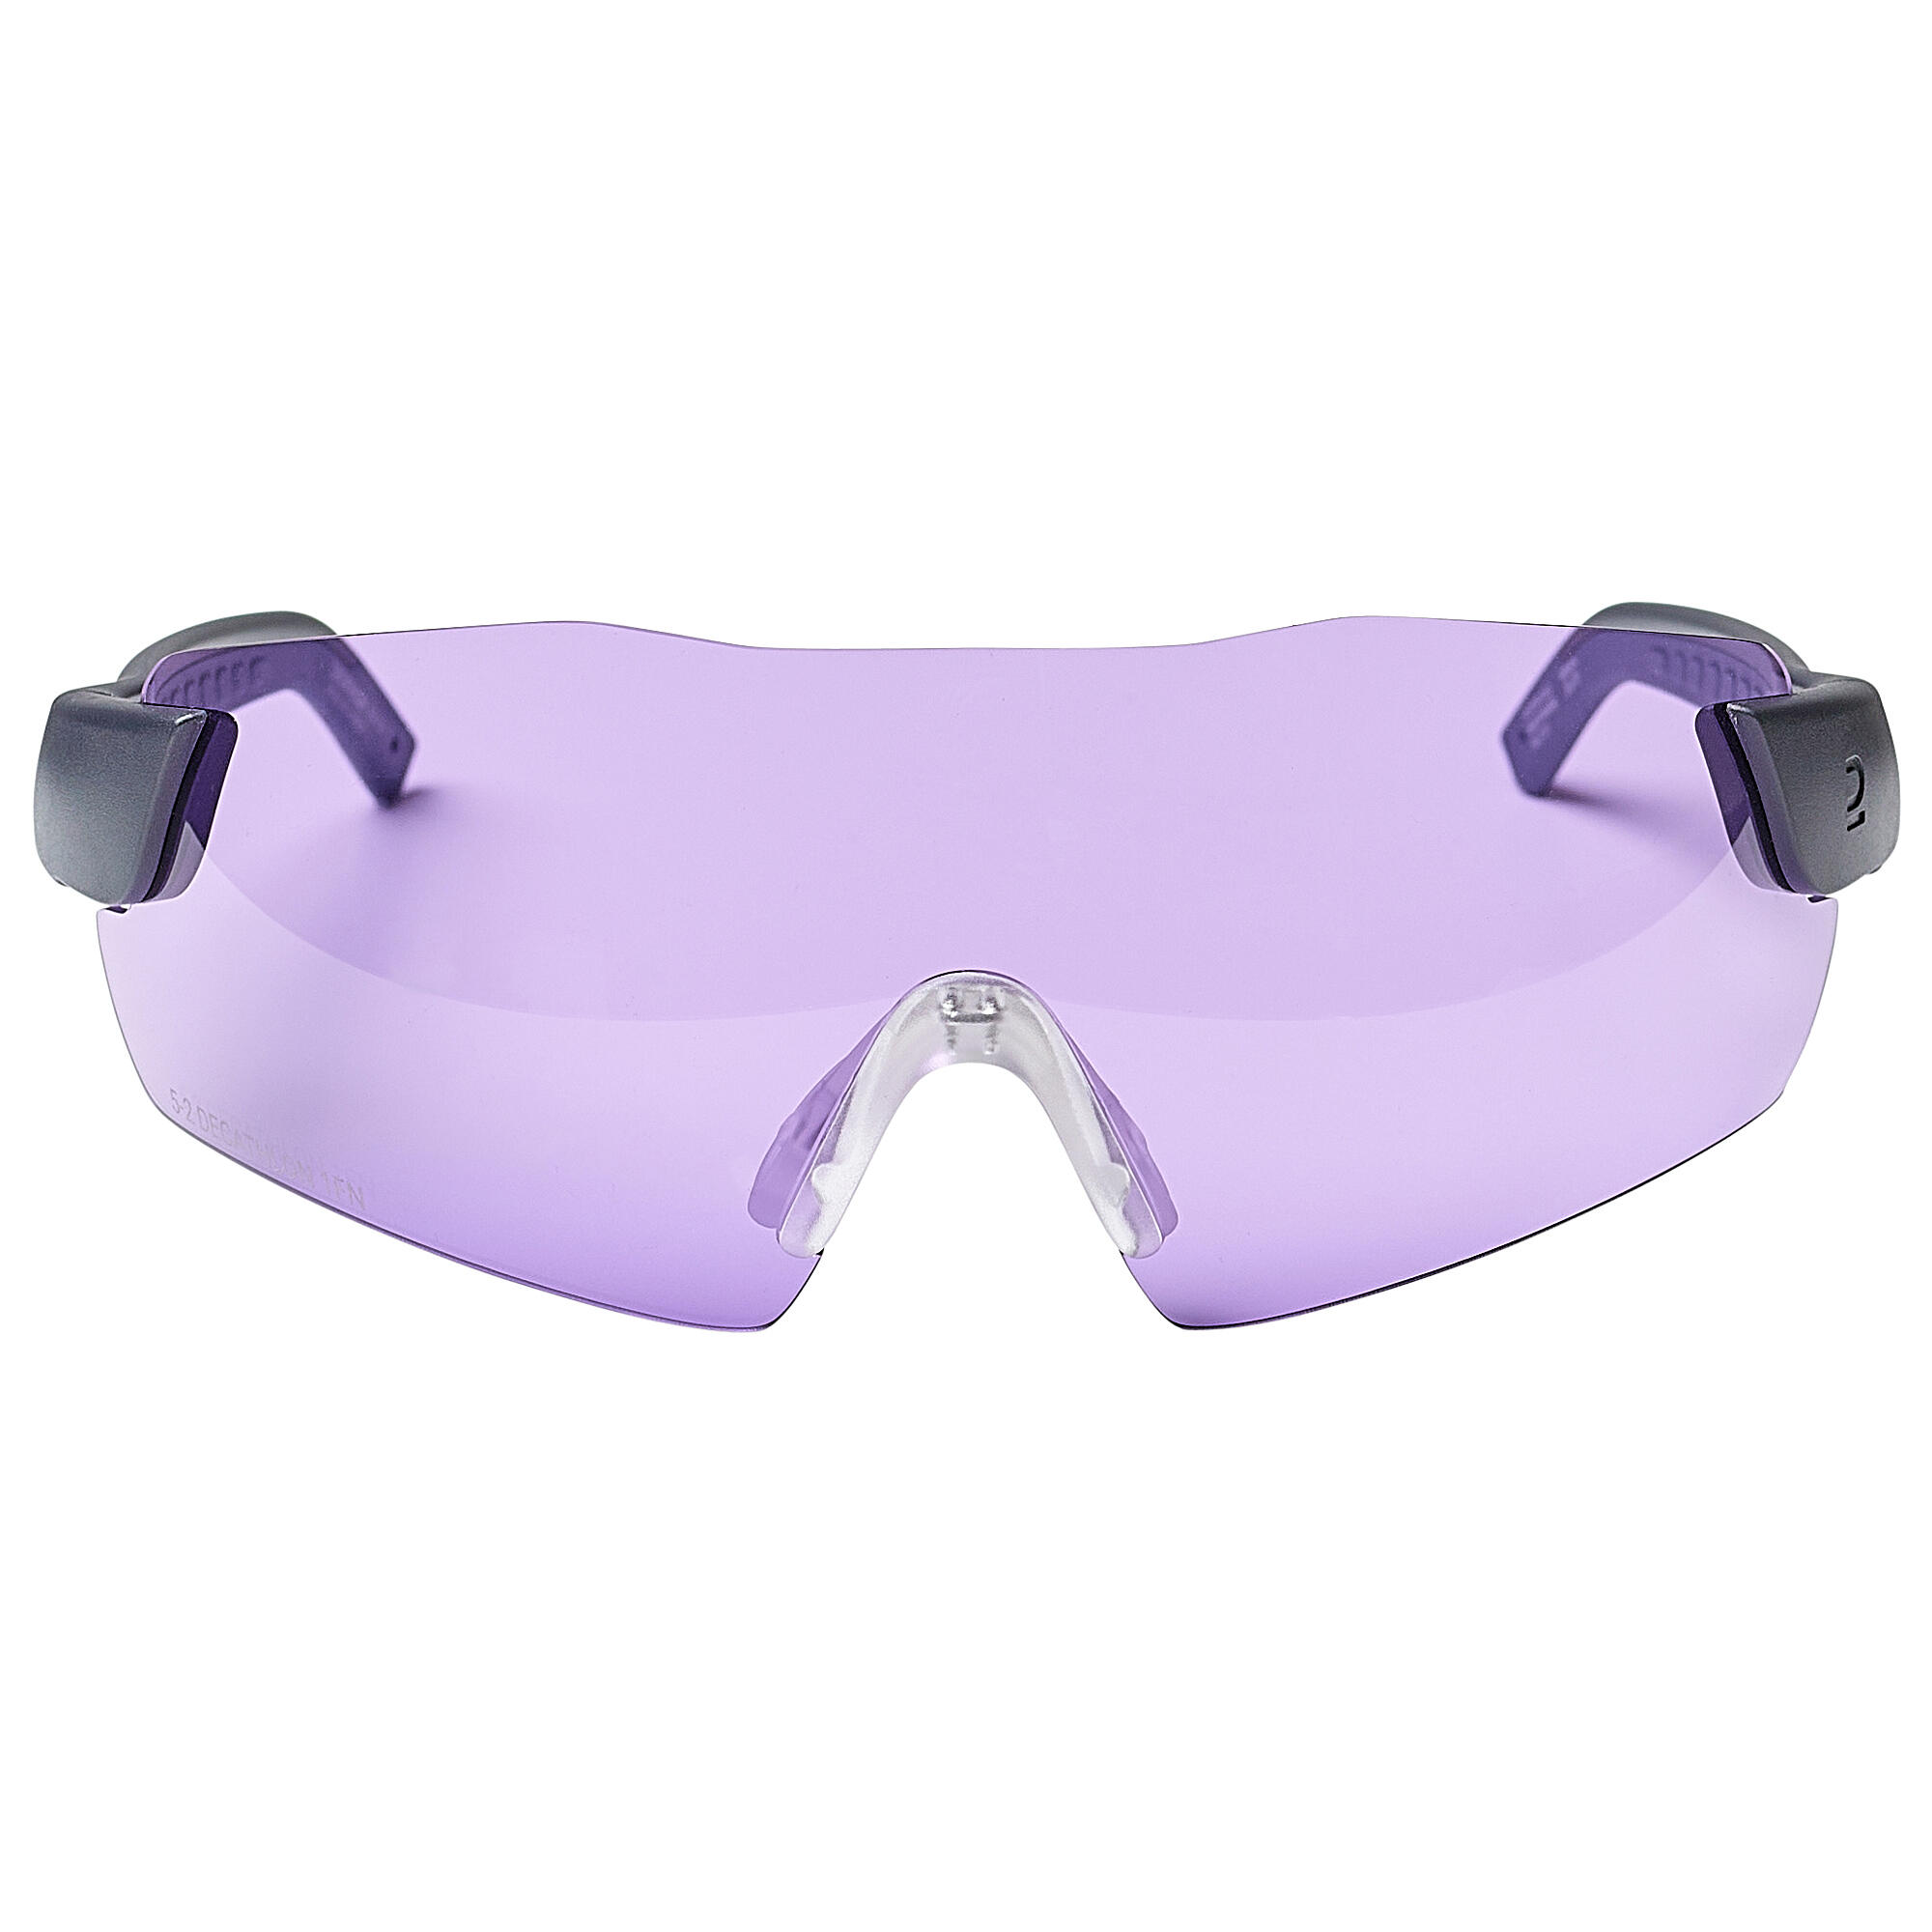 SAFETY GLASSES FOR CLAY PIGEON SHOOTING 500 PURPLE CATEGORY 2 6/6